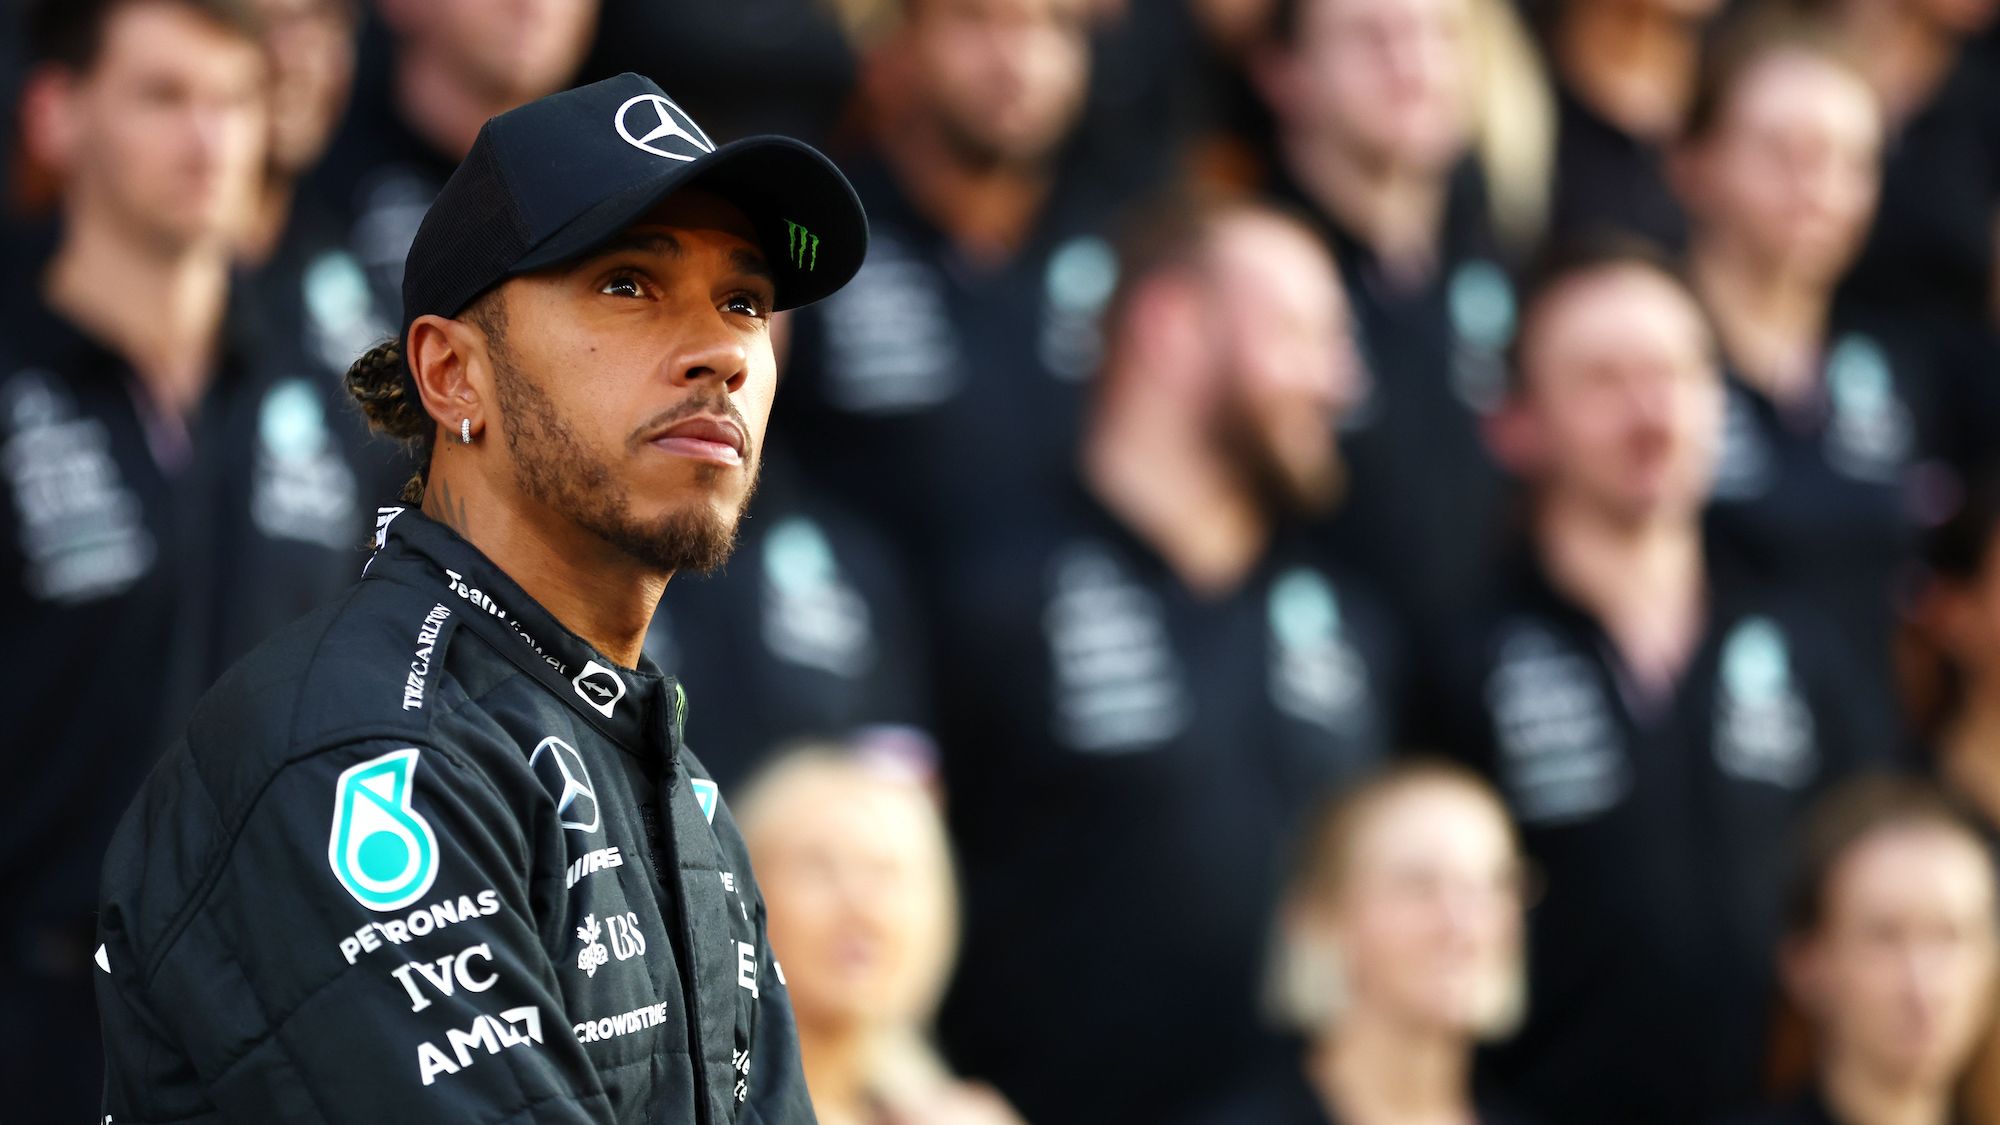 Lewis Hamilton says \'nothing will stop him\' speaking out after new rules clamping down on political statements | CNN